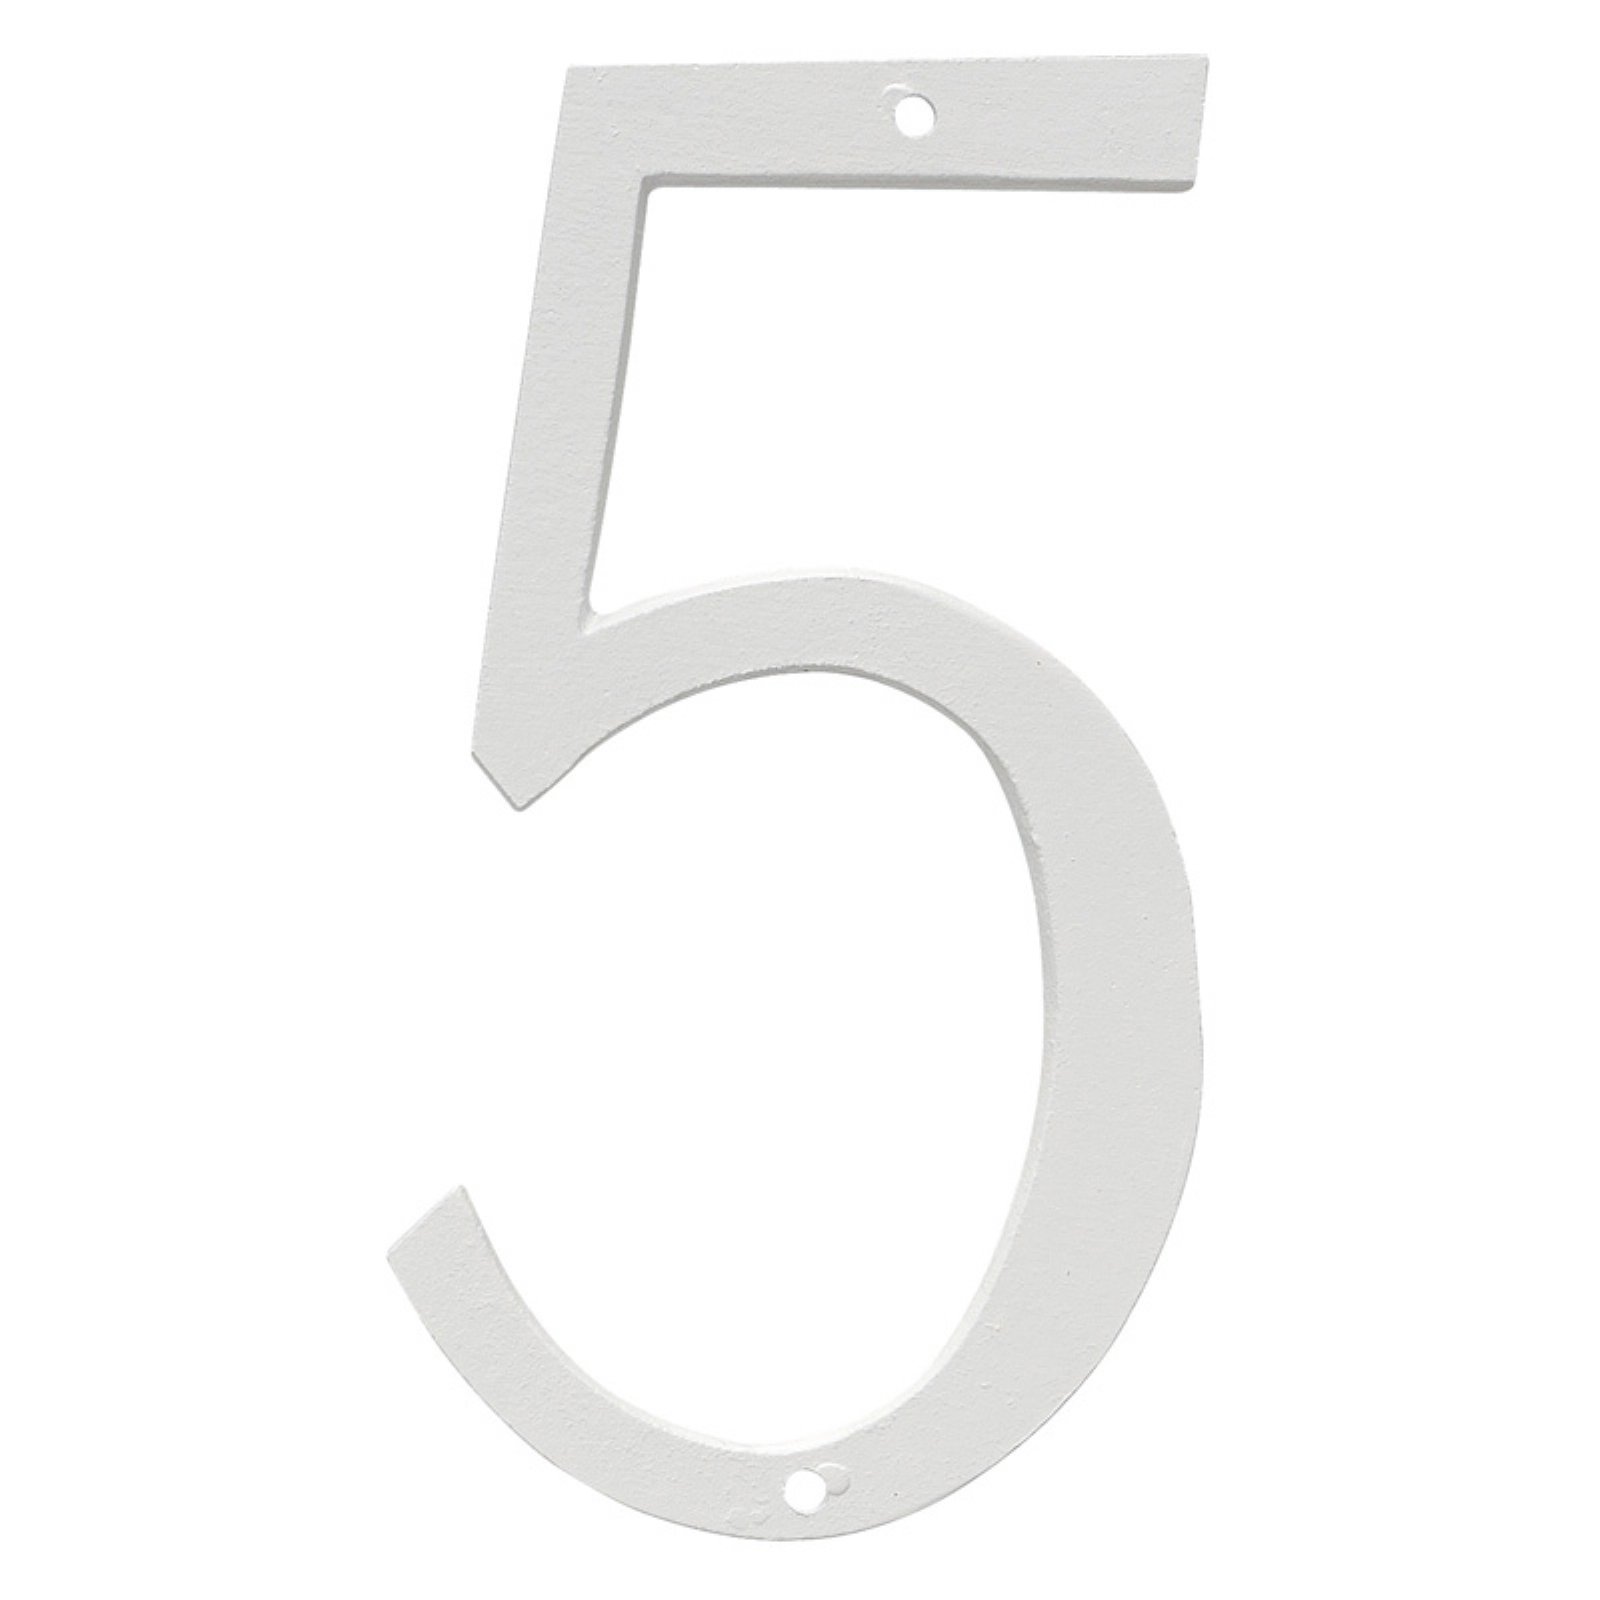 Montague Metal Products CSHN-4-12 12 In. Standard Modern Font Individual House Number 4 - image 5 of 11